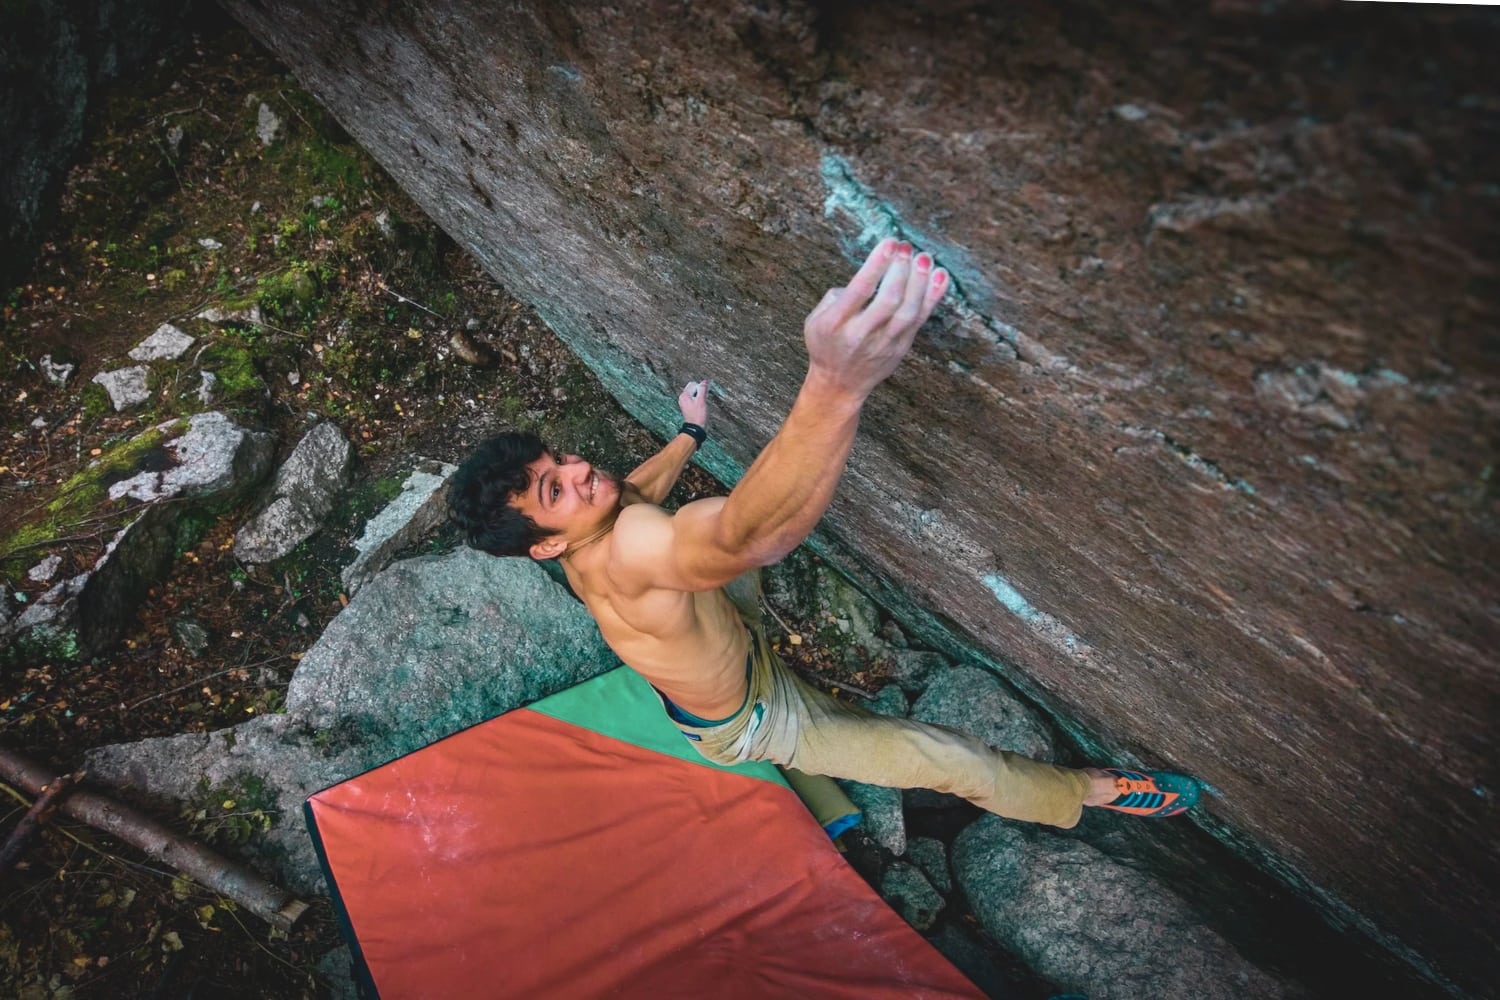 Aidan Roberts projecting the hardest boulder problem in the world